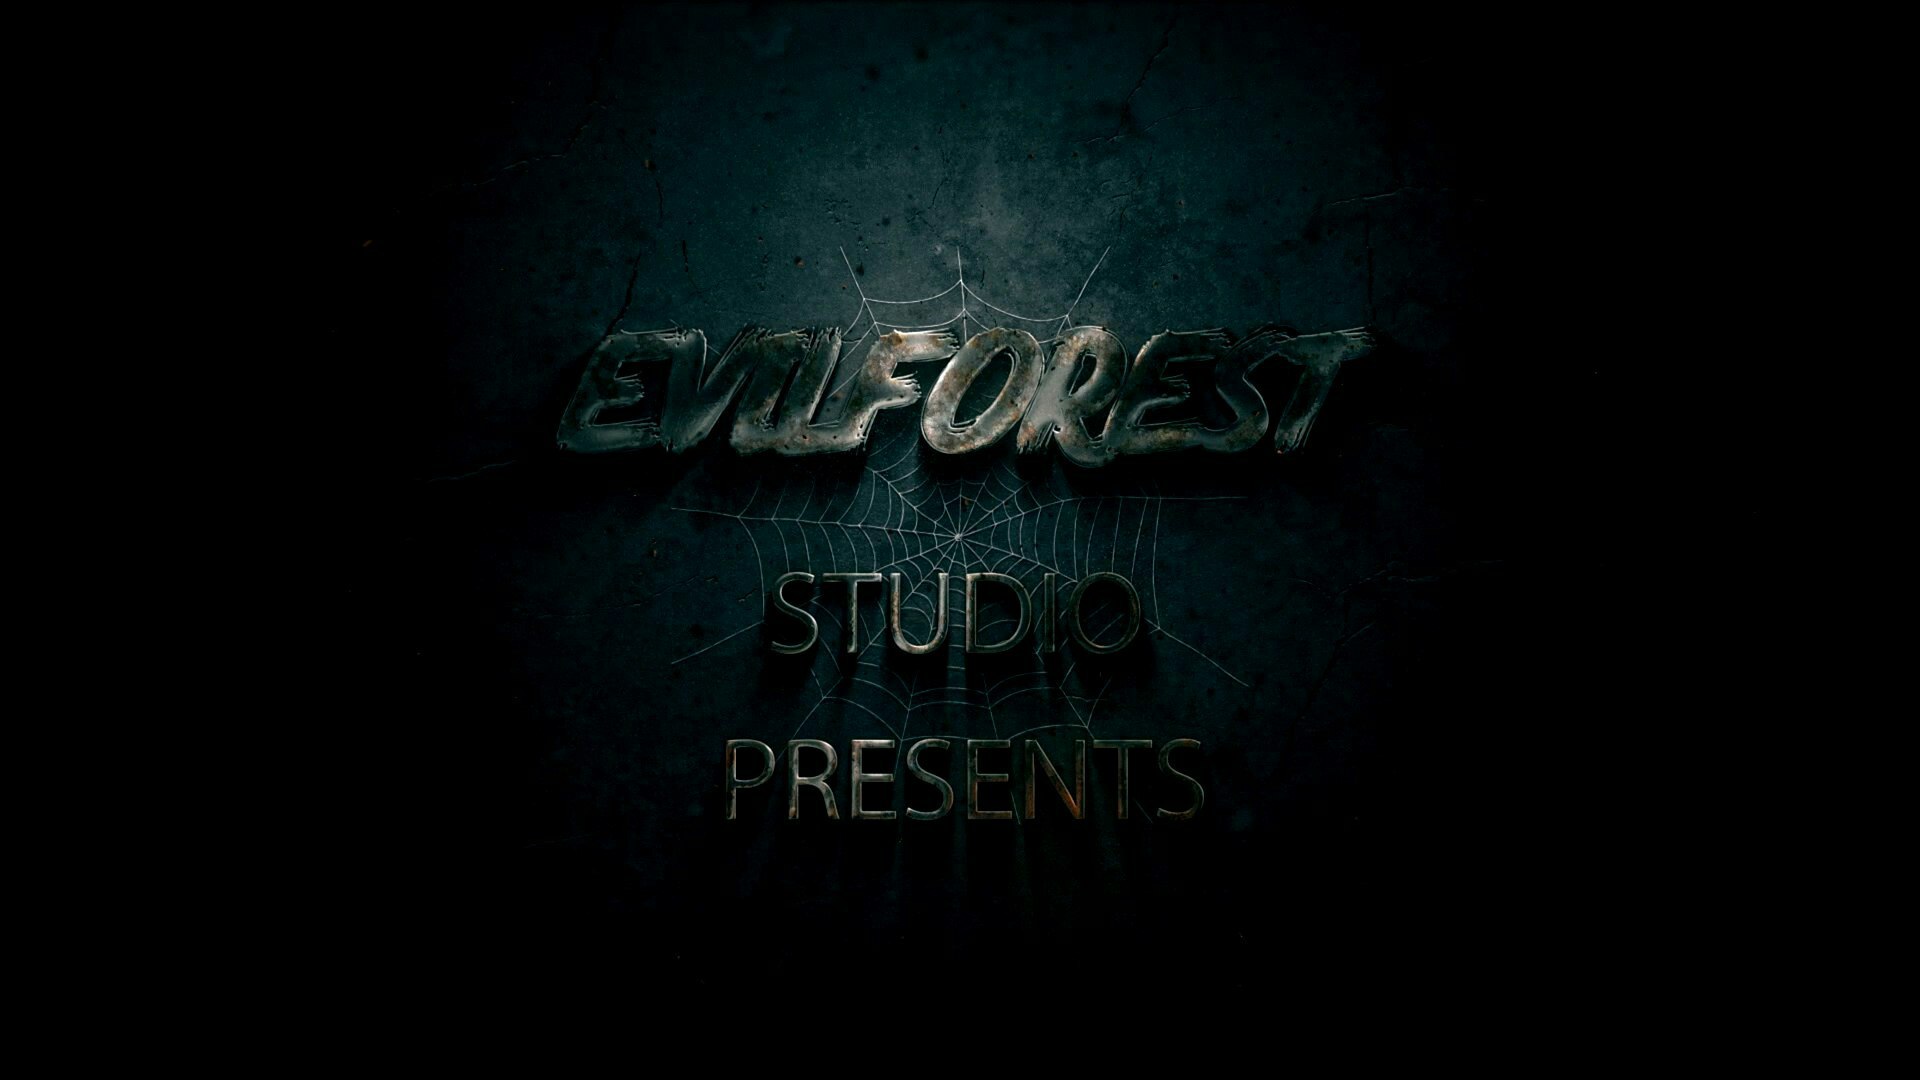 EvilForest Story!